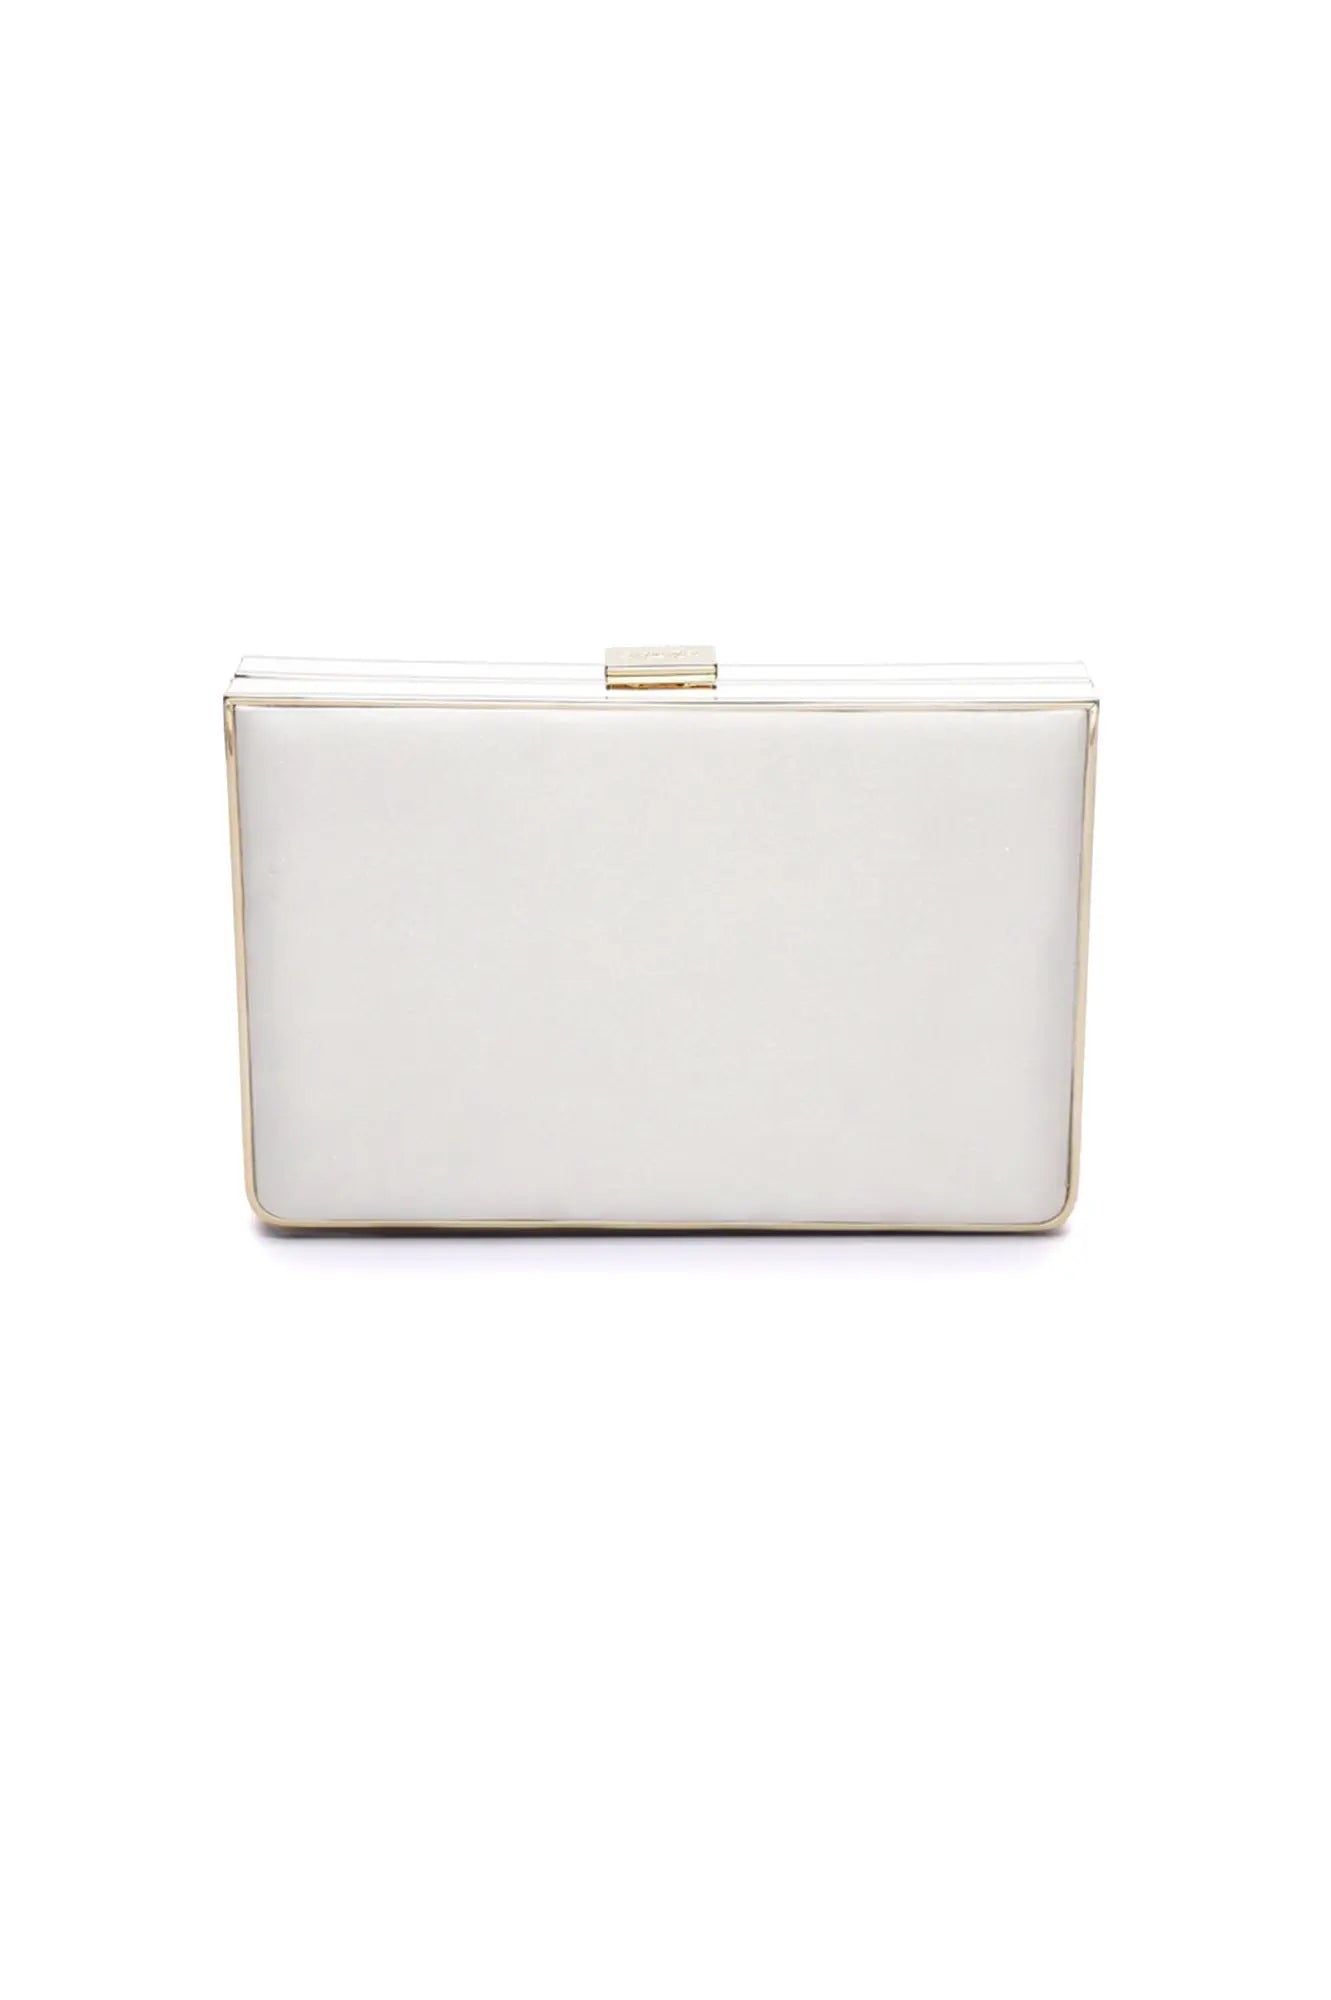 White Venezia clutch with a gold-tone frame and clasp, perfect as a luxury evening accessory from The Bella Rosa Collection.